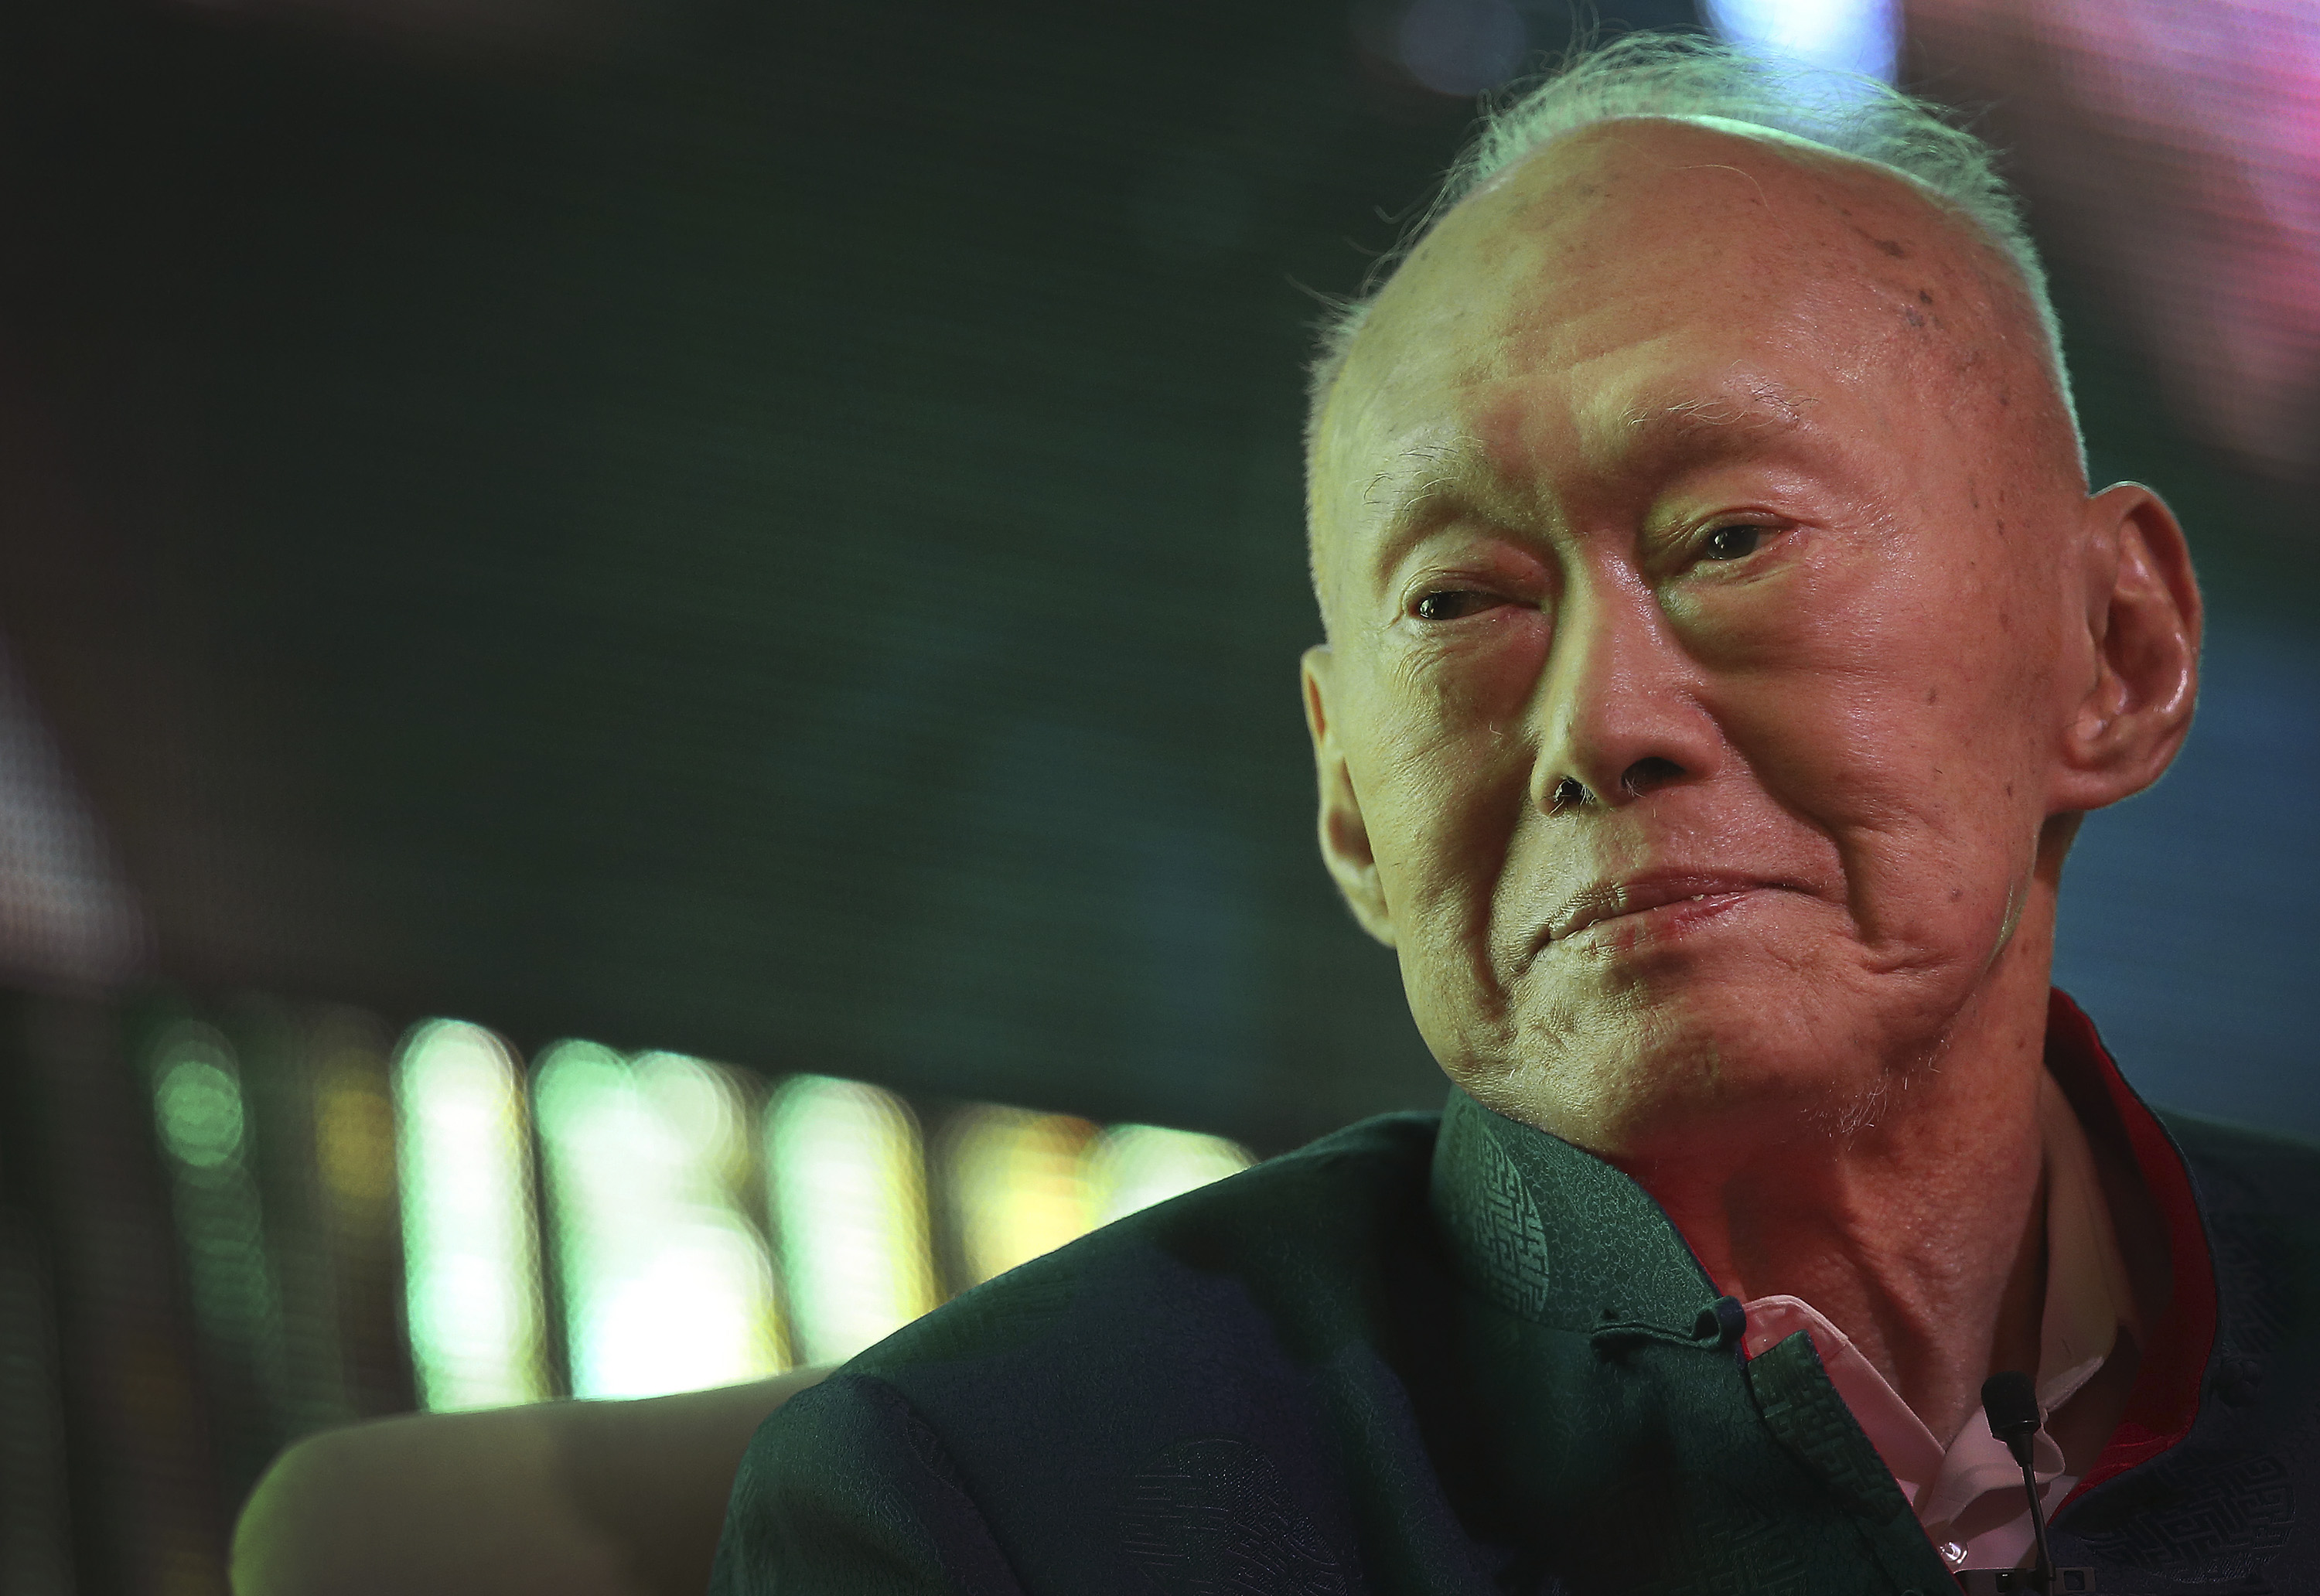 Singapore's former Prime Minister Lee Kuan Yew, March 20, 2013 in Singapore